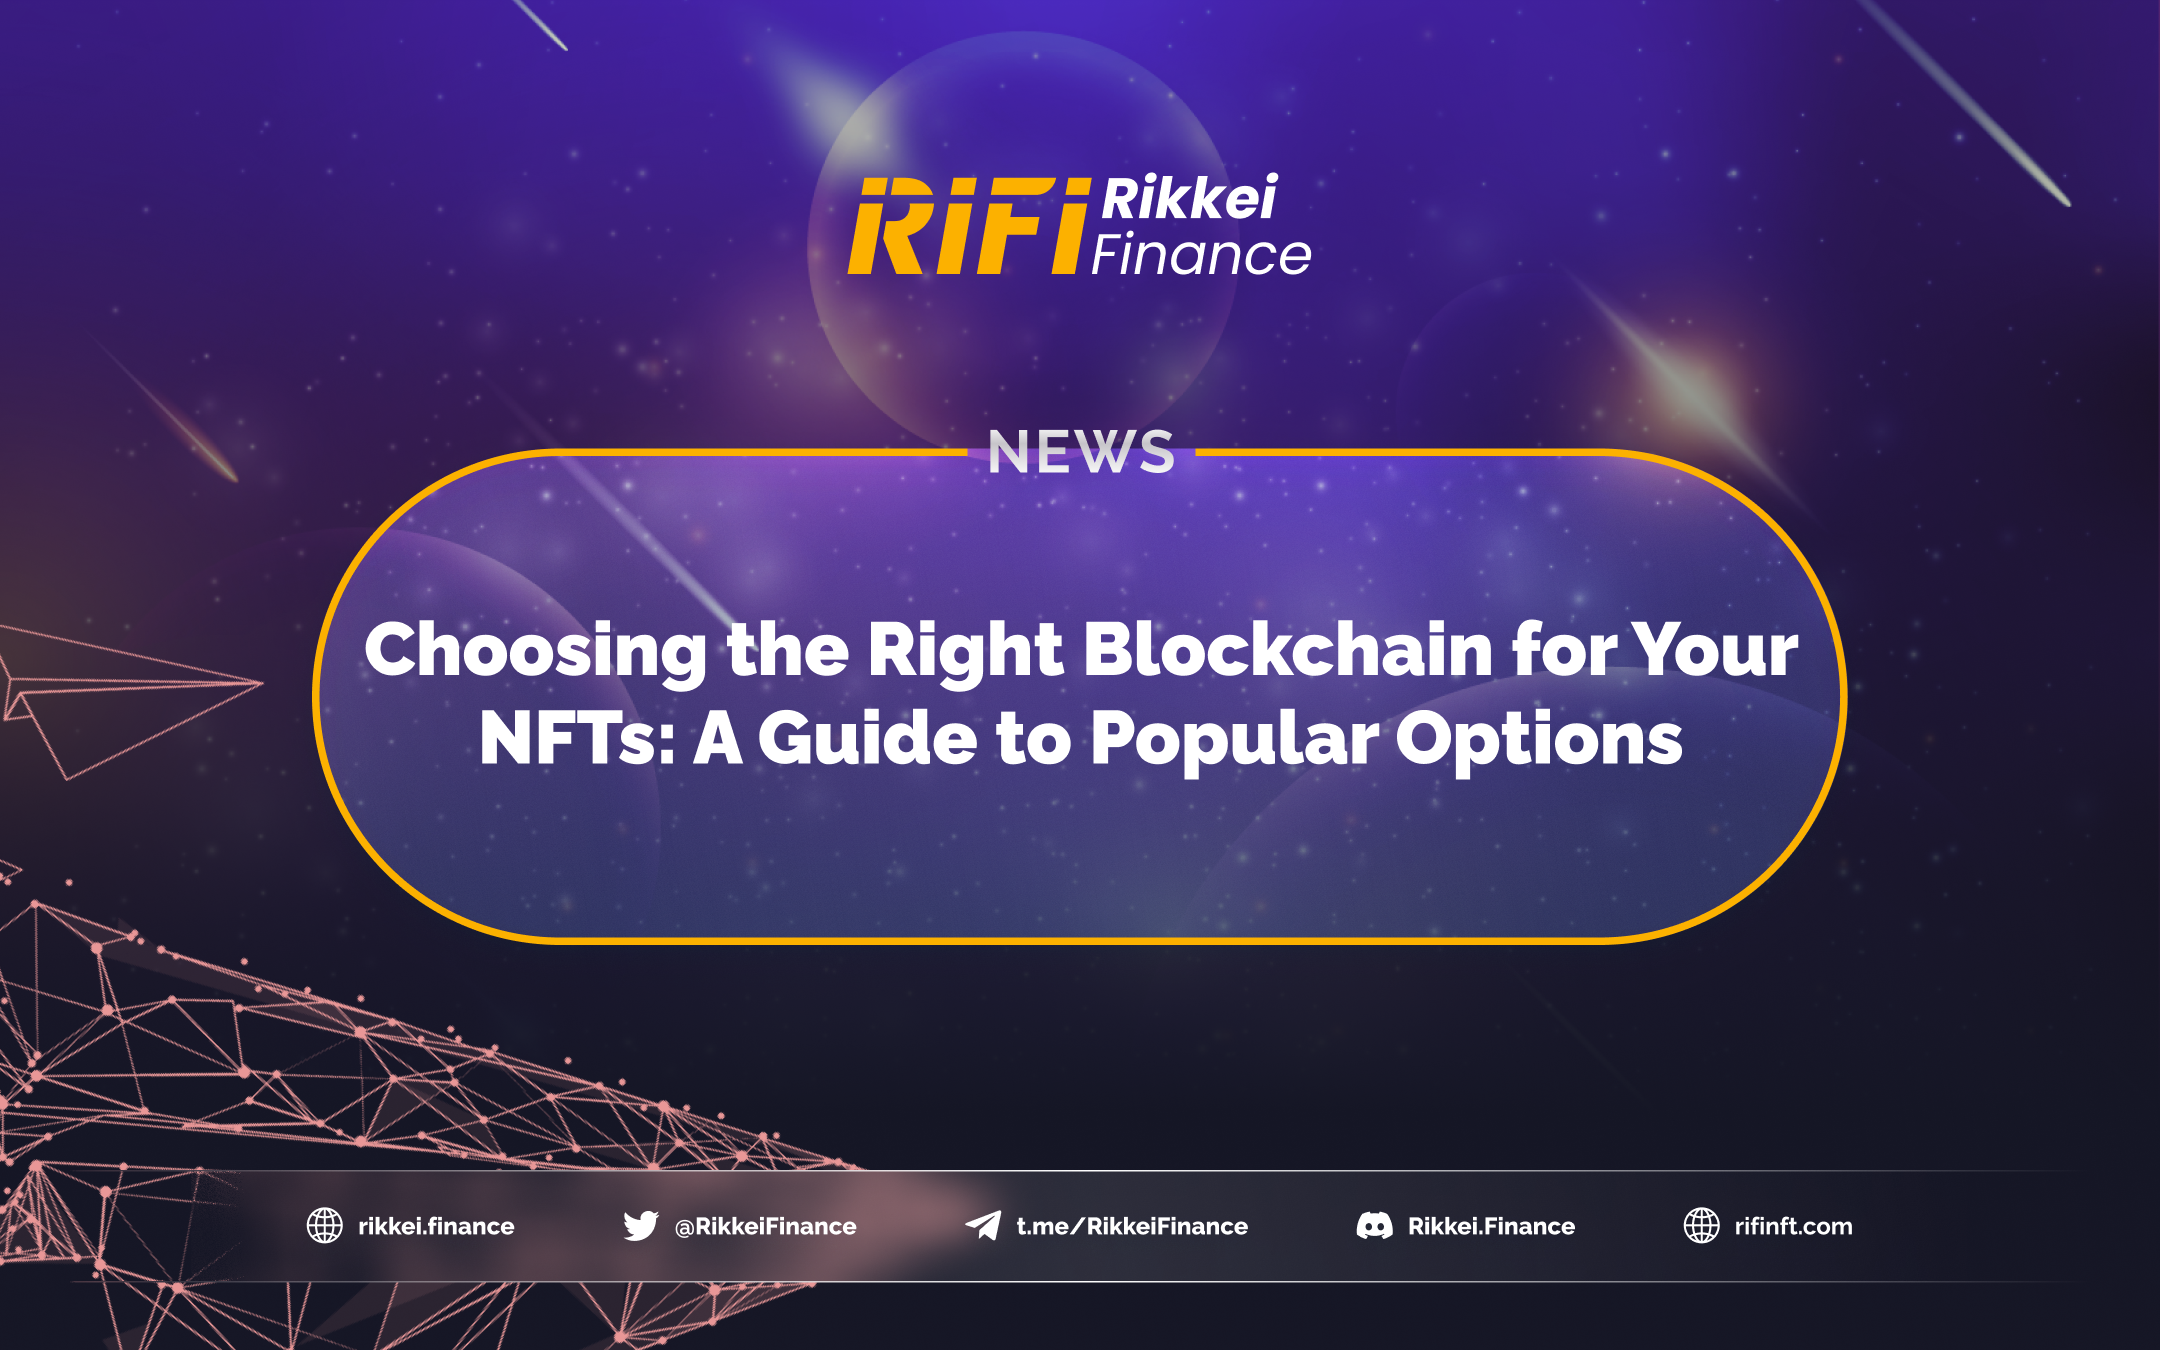 Choosing the Right Blockchain for Your NFTs: A Guide to Popular Options